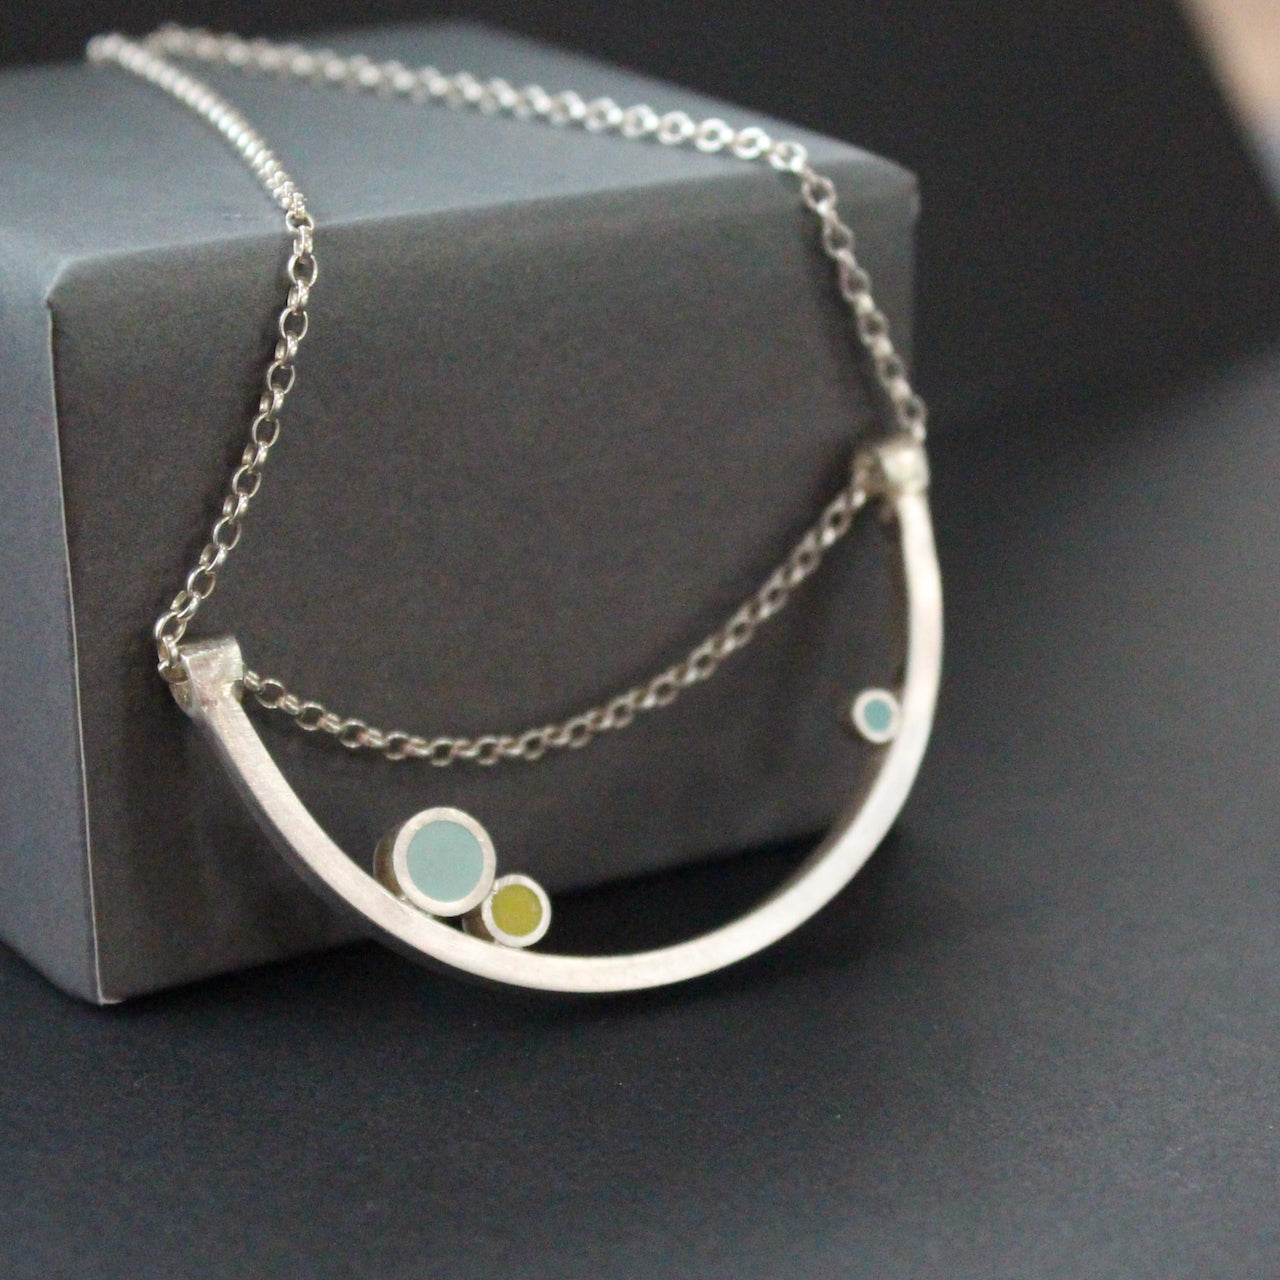 Curved necklace with 3 dots of turquoise, yellow, aqua sitting on curve by UK artist Clare Lloyd